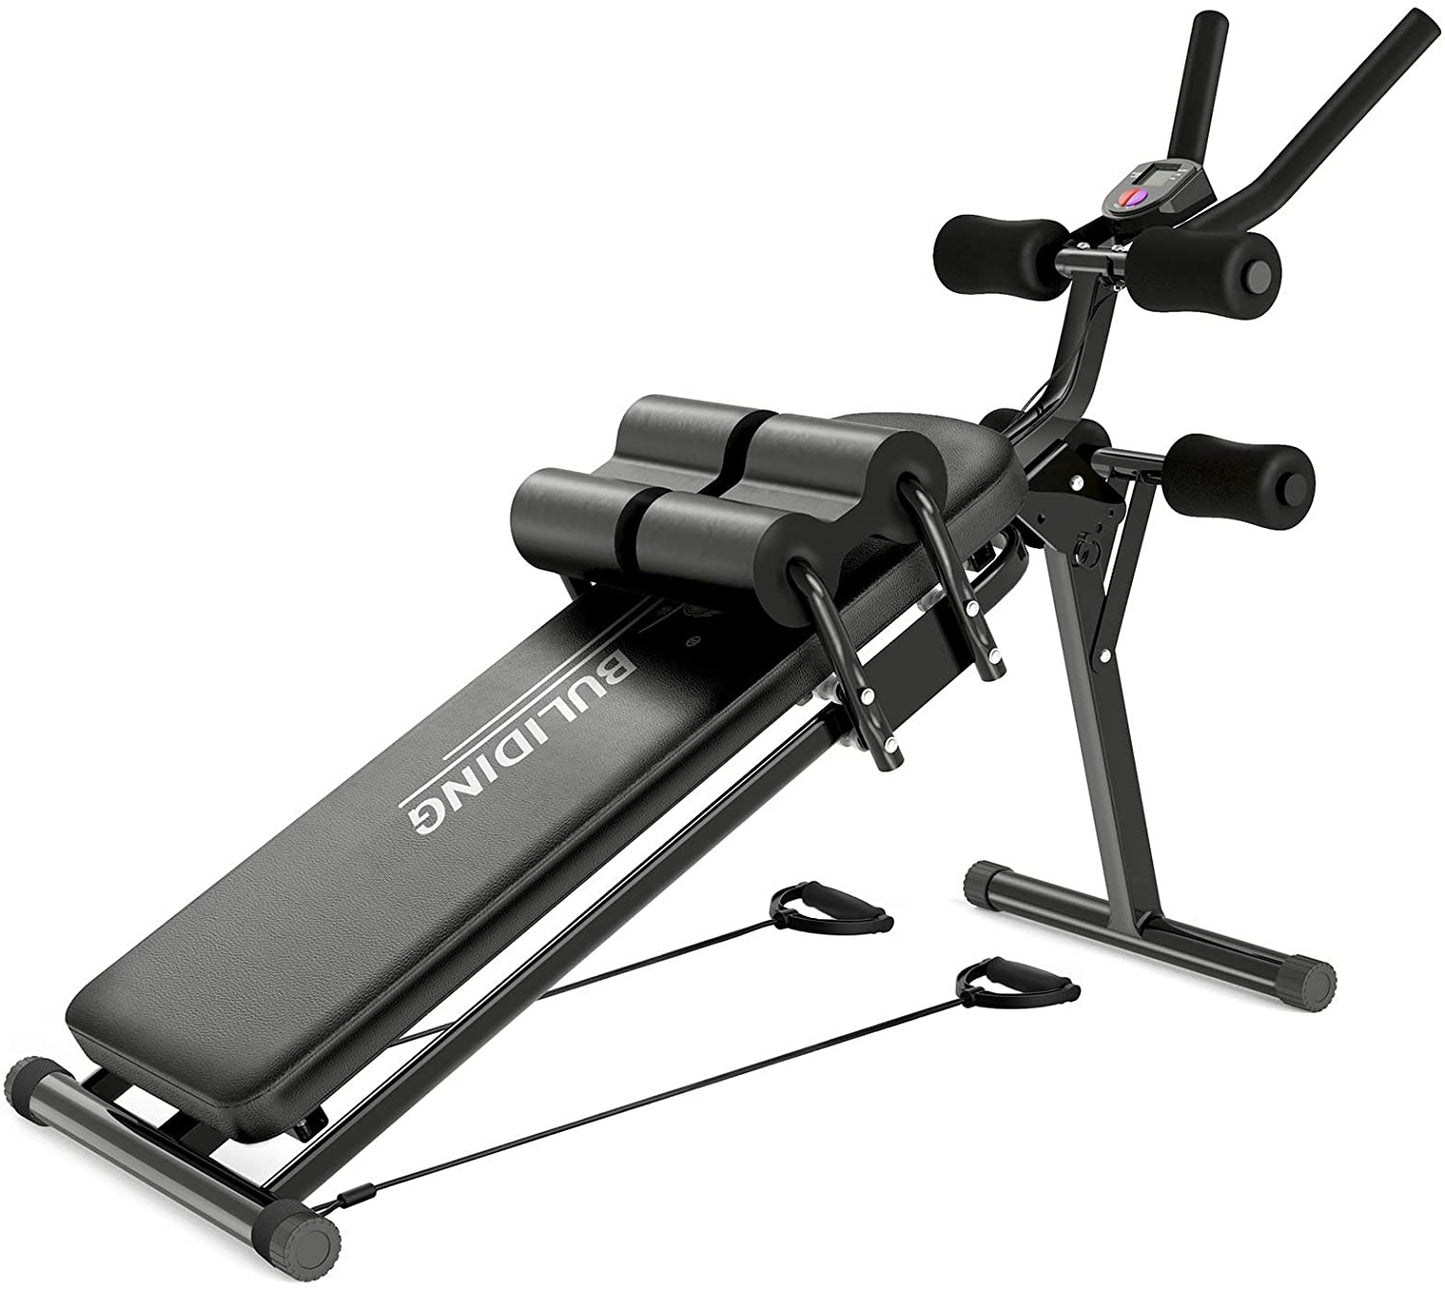 Sit-Up Bench, Incline Decline Bench for Home Gym; Abdominal Exercise Equipment